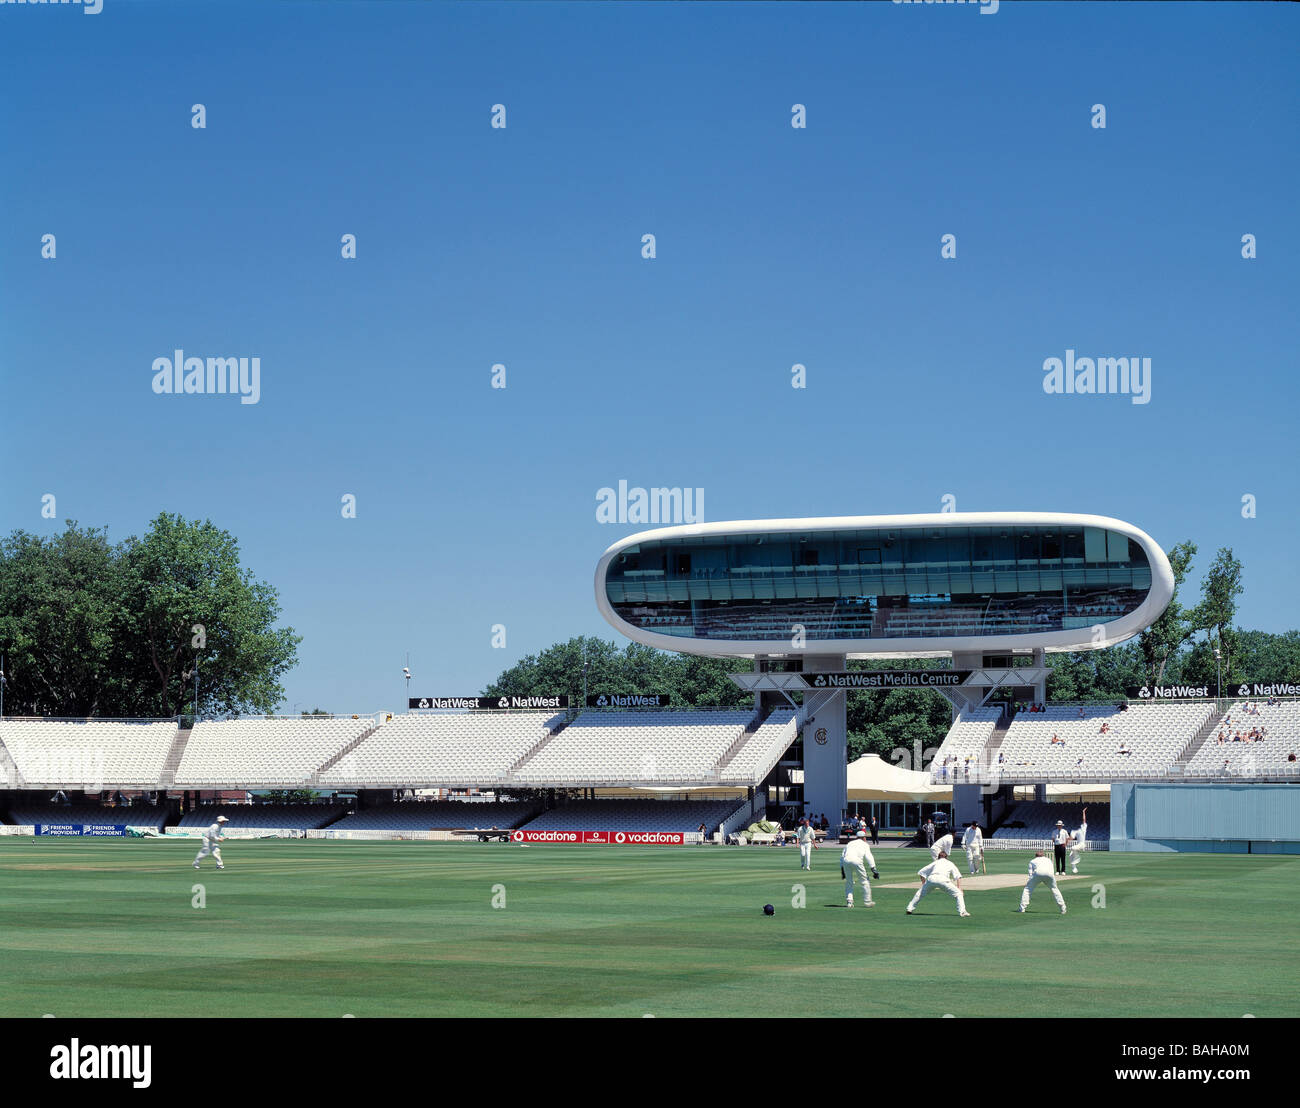 nat west media centre- lords cricket ground cricket game in play Stock Photo